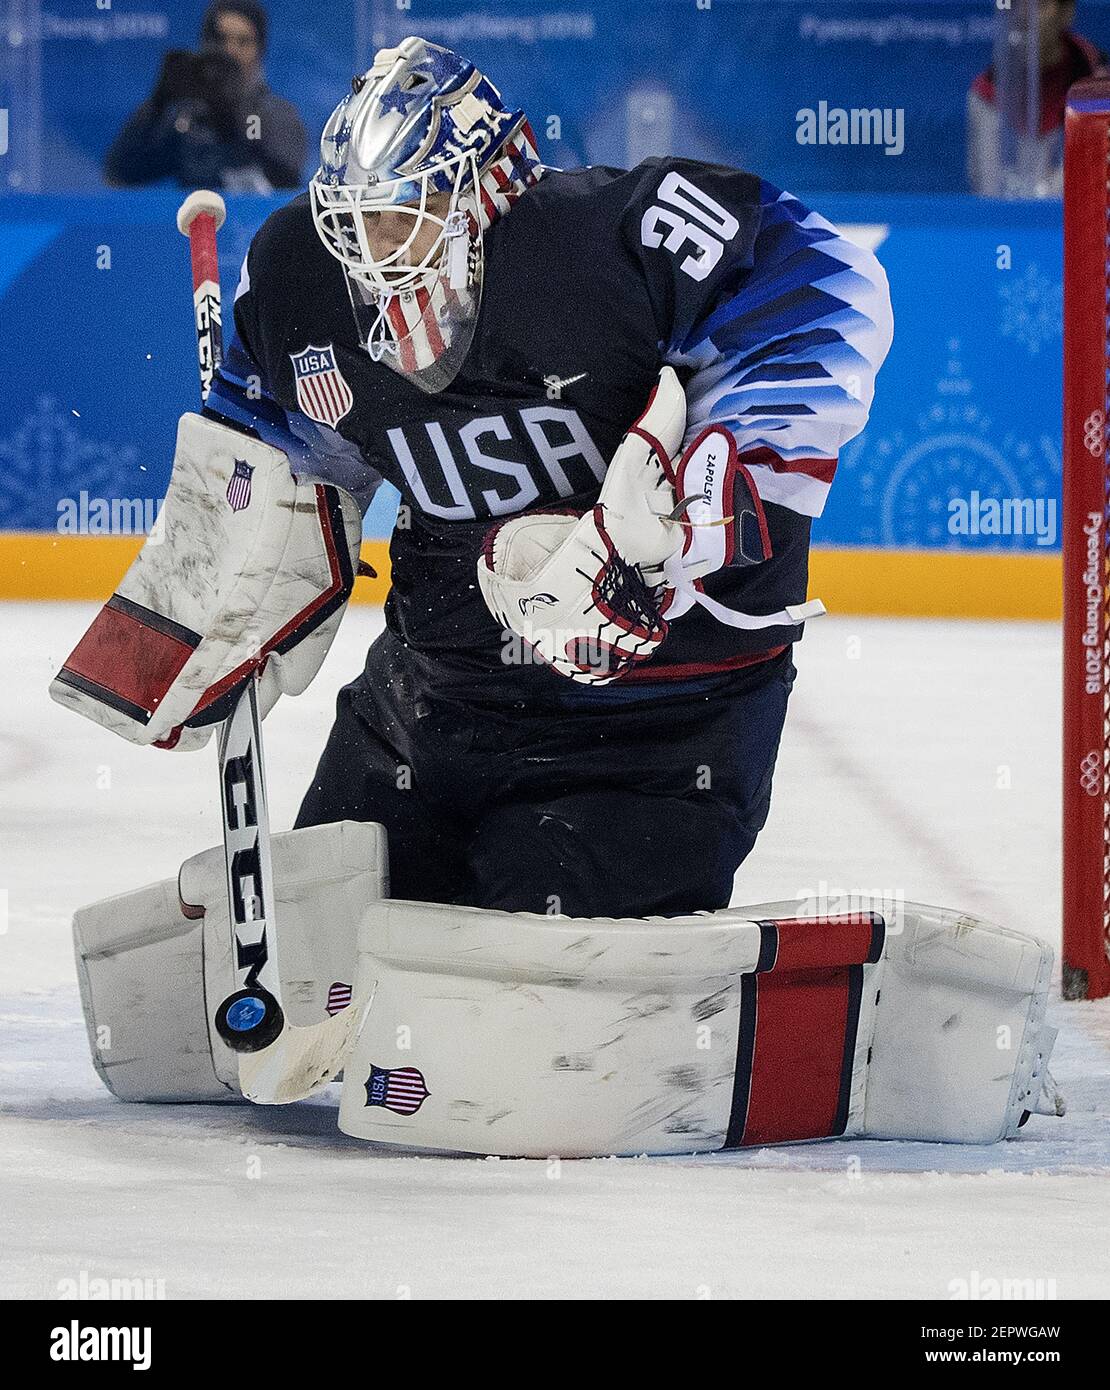 USA goalie Ryan Zapolski (30) makes a save in the second period against Slovakia during group play on Friday, Feb. 16, 2018, at South Korea's Gangneung Hockey Centre in the Pyeongchang Winter Olympics. (Photo by Carlos Gonzalez/Minneapolis Star Tribune/TNS/Sipa USA) Stock Photo